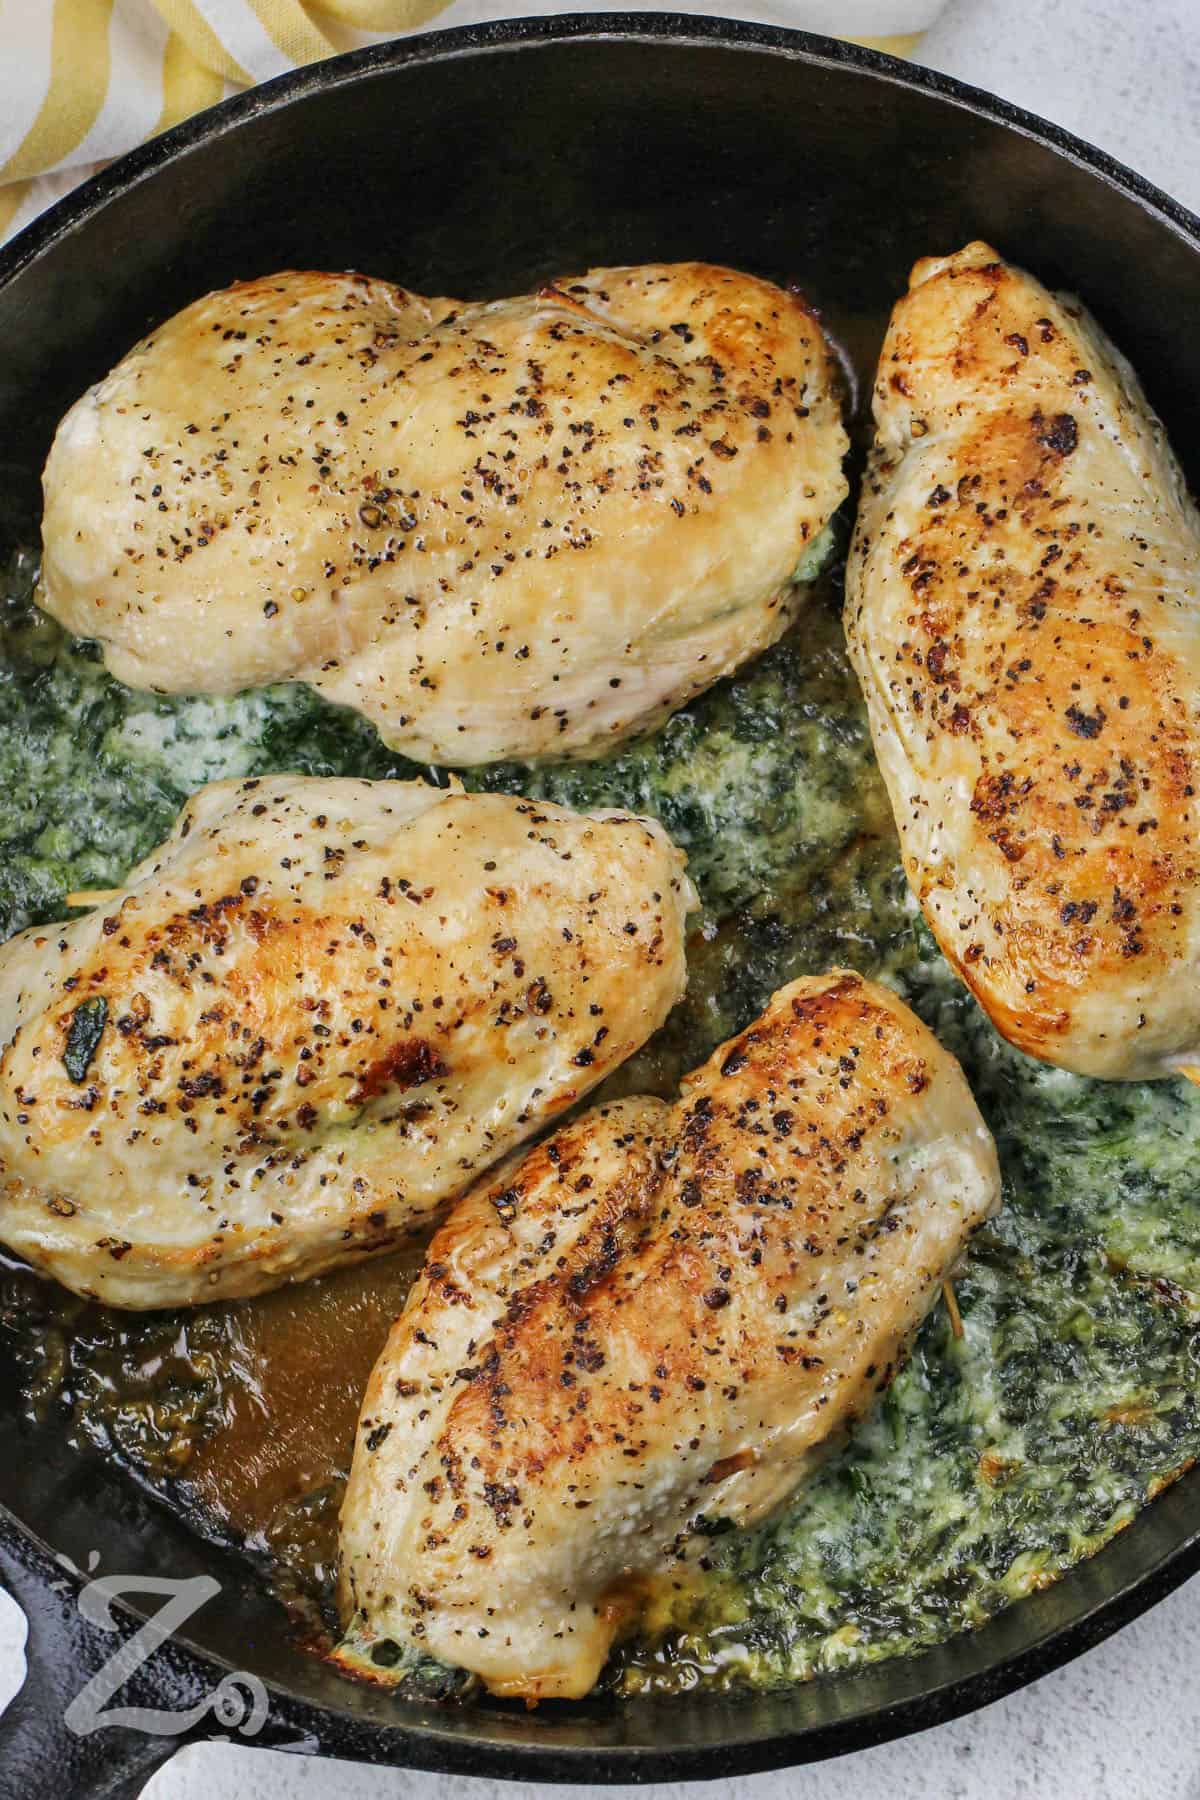 Spinach Stuffed Chicken Breasts preppared in a frying pan